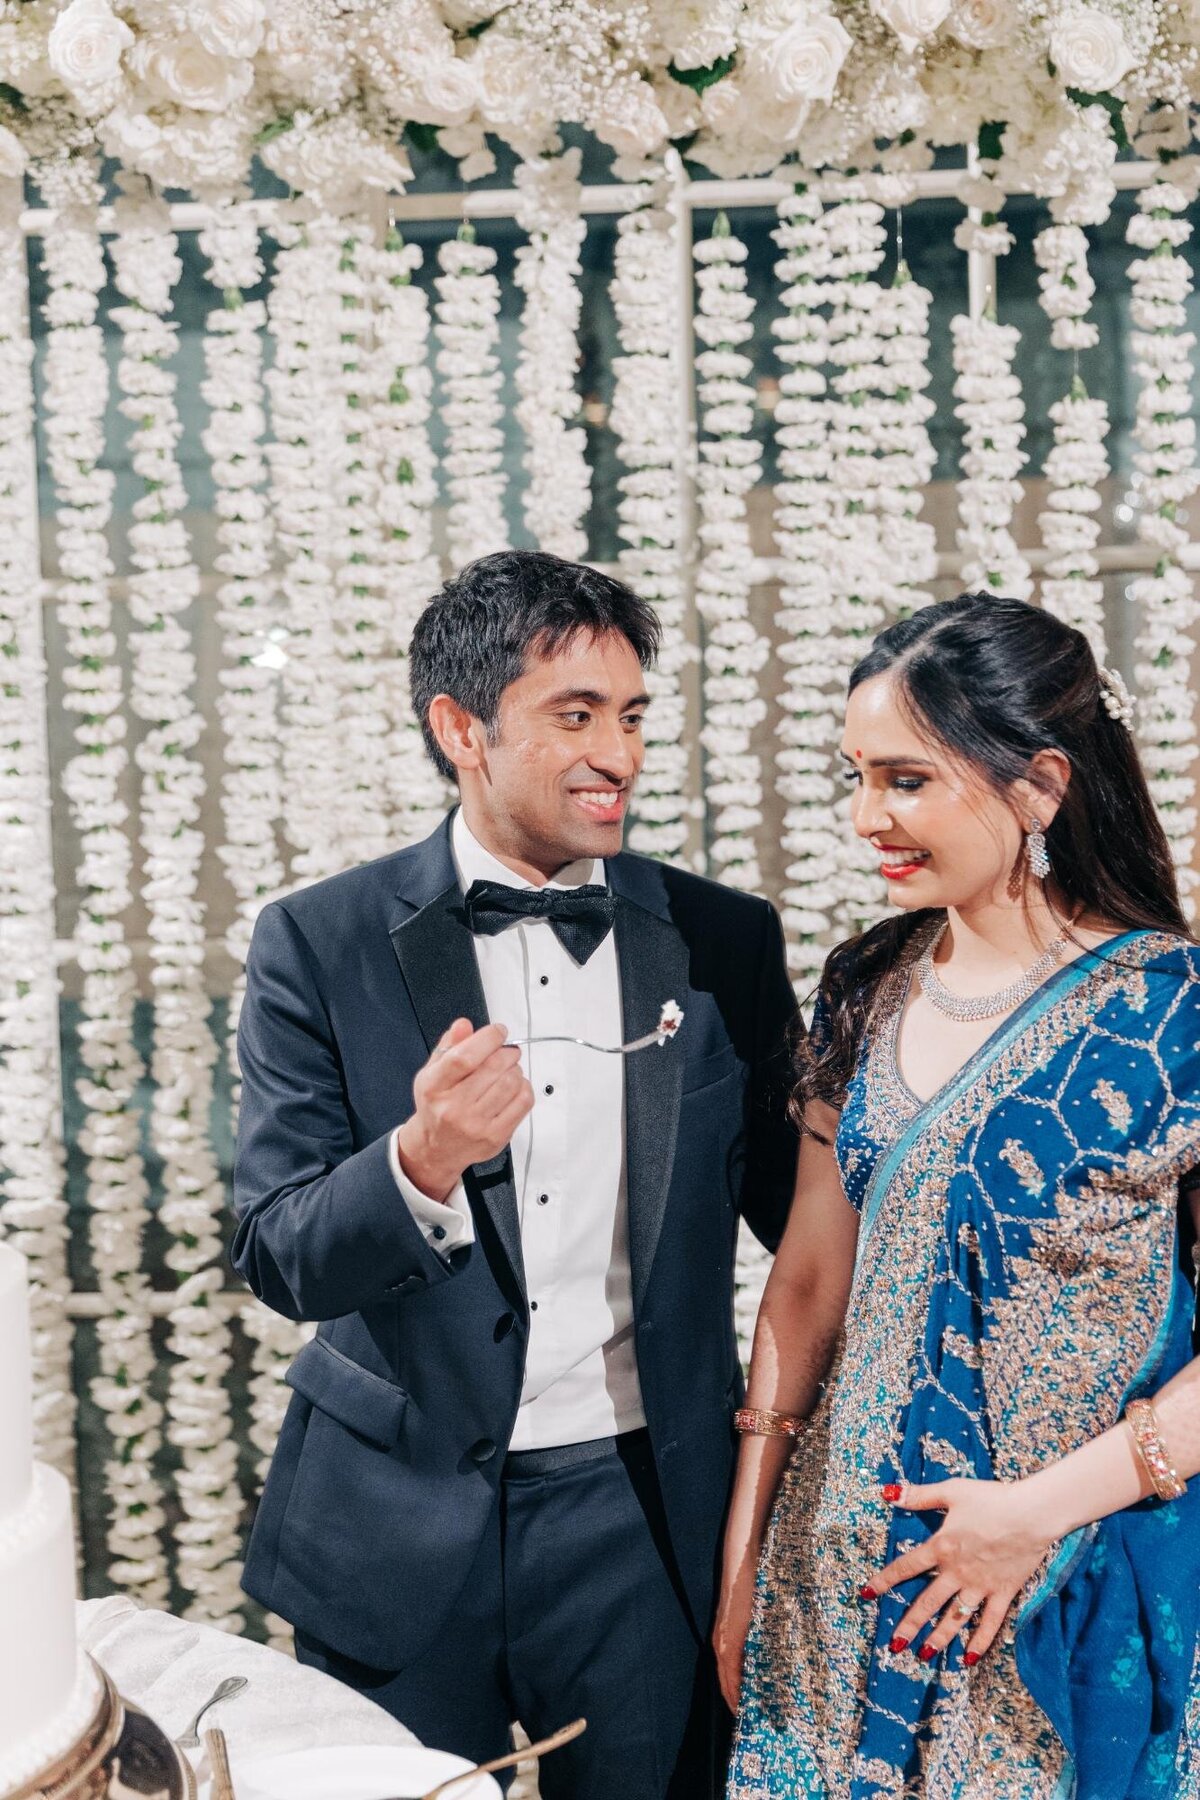 A bride in a blue saree and a groom in a tuxedo smile at each other at their wedding, standing in front of a floral backdrop.